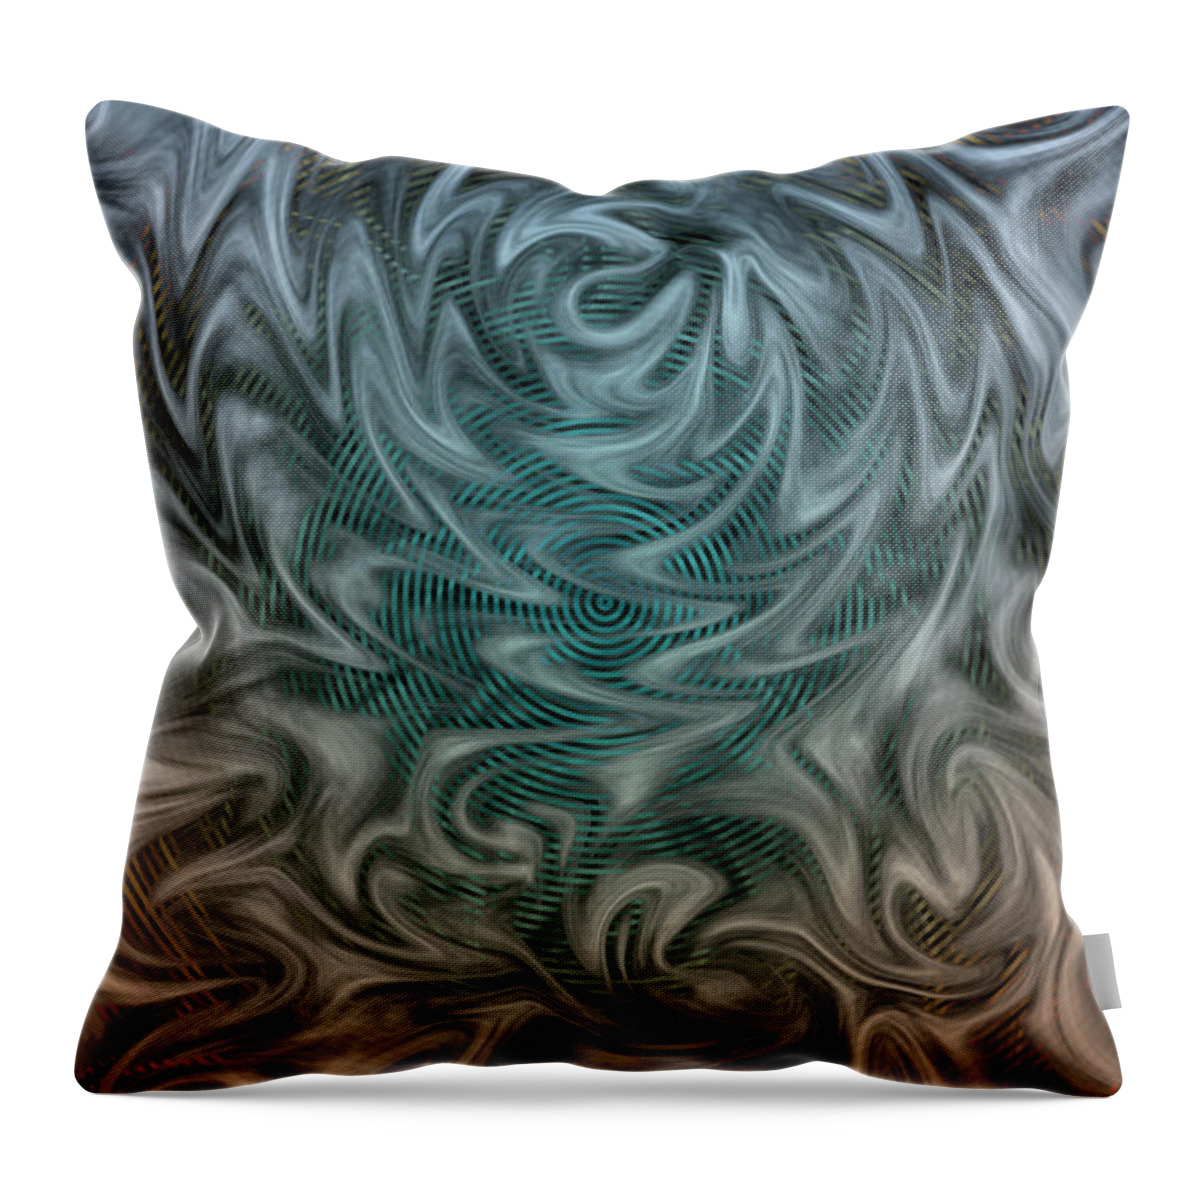 Abstract Experimentalism Throw Pillow featuring the digital art Wherever You Go, There You Are by Becky Titus